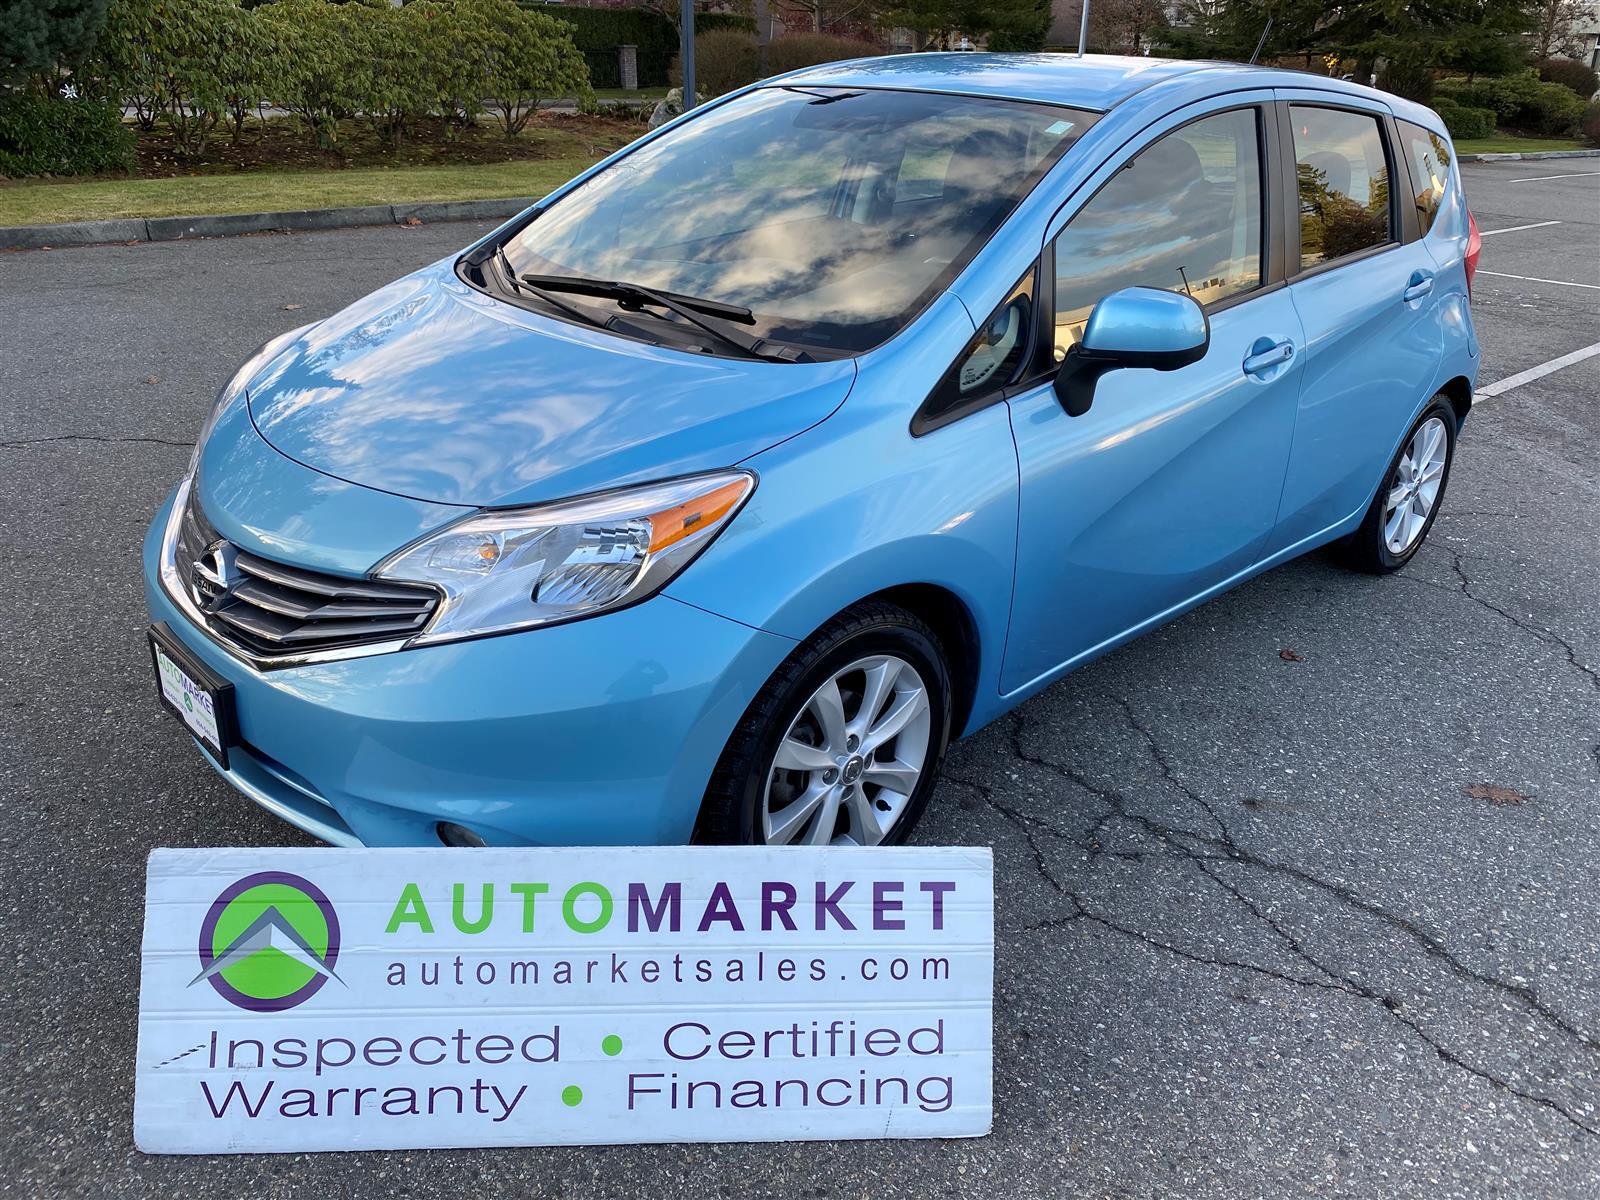 2014 Nissan Versa Note SL TECHNOLOGY, FINANCING, WARRANTY, INSPECTED WITH